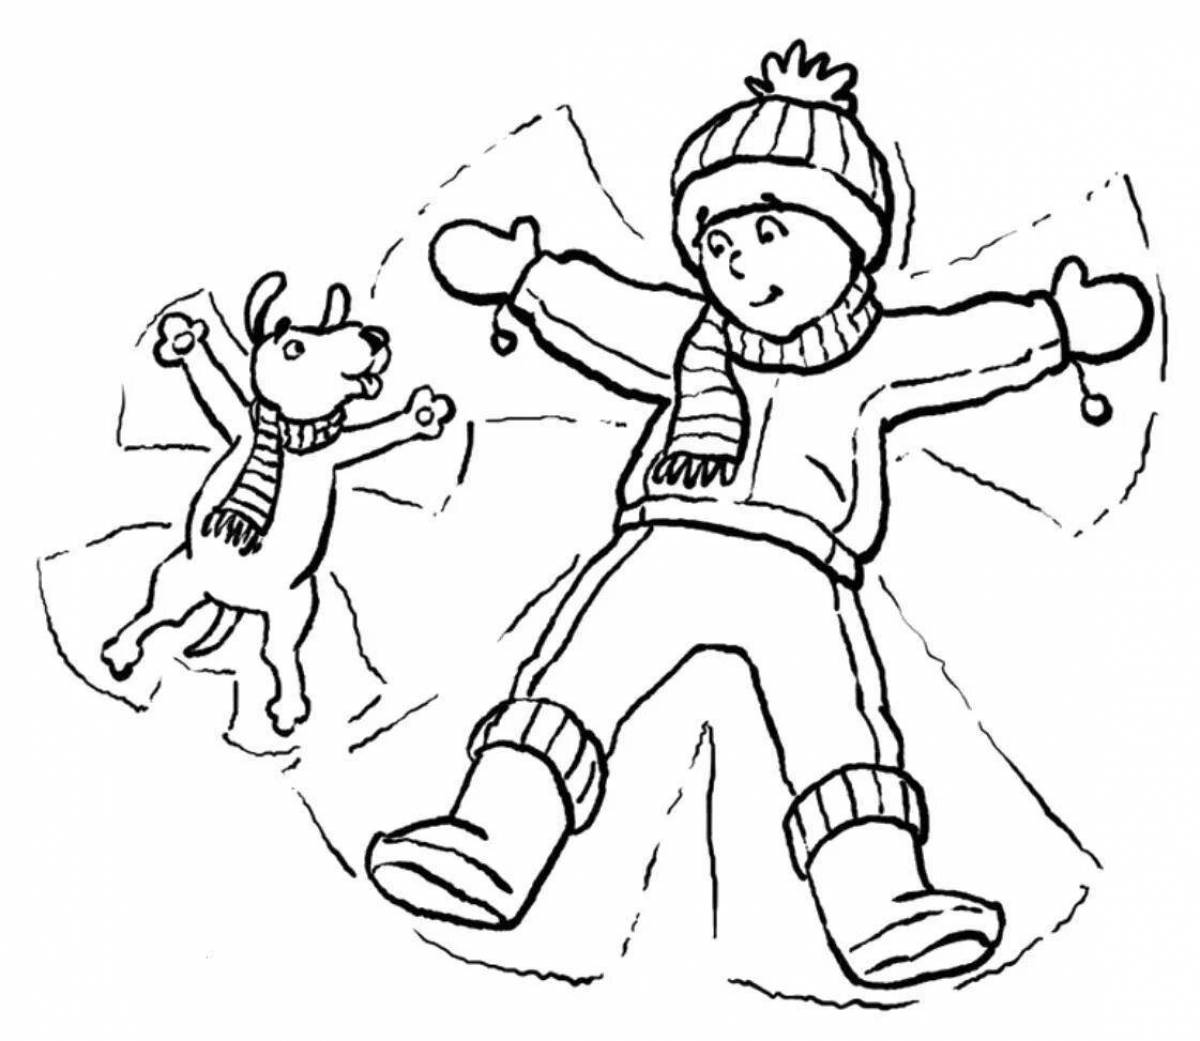 Attractive coloring book for children boy in winter clothes